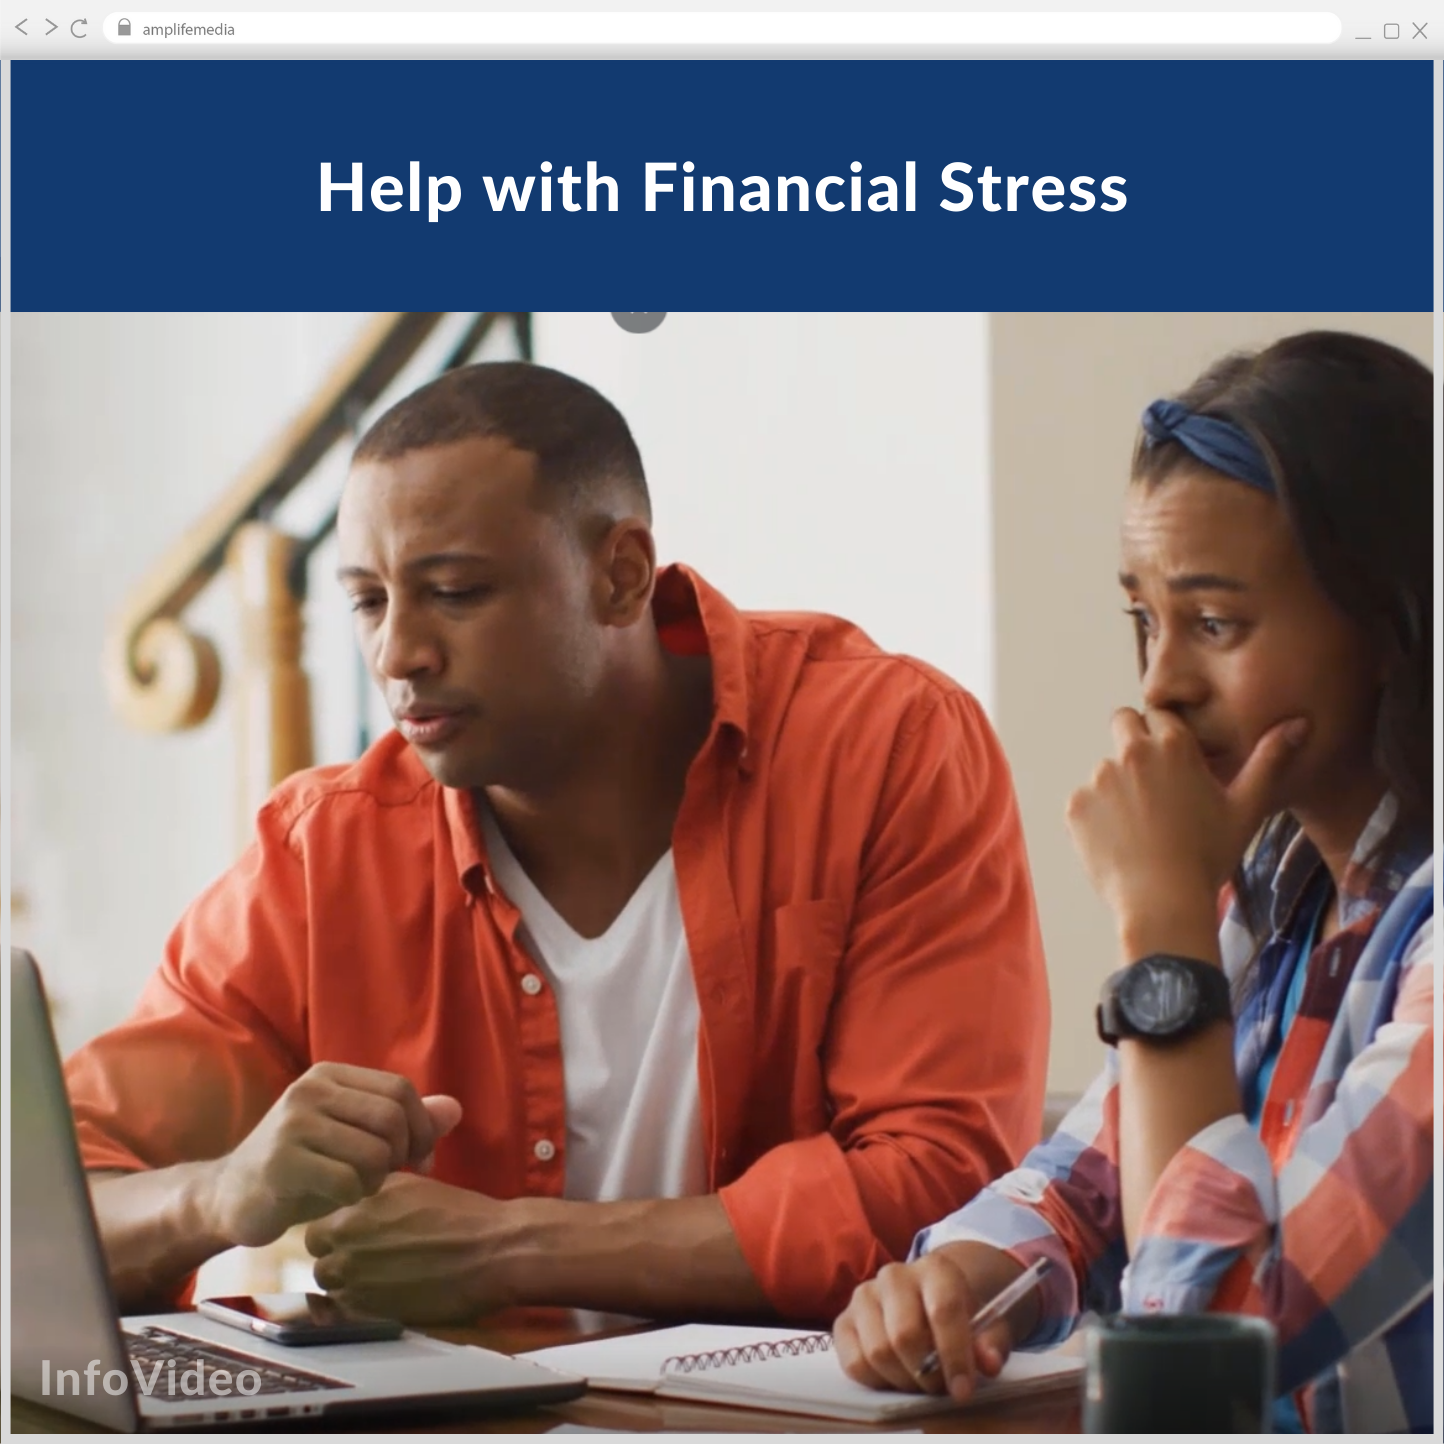 Subscription to Wellbeing Media: Help with Financial Stress IV 222